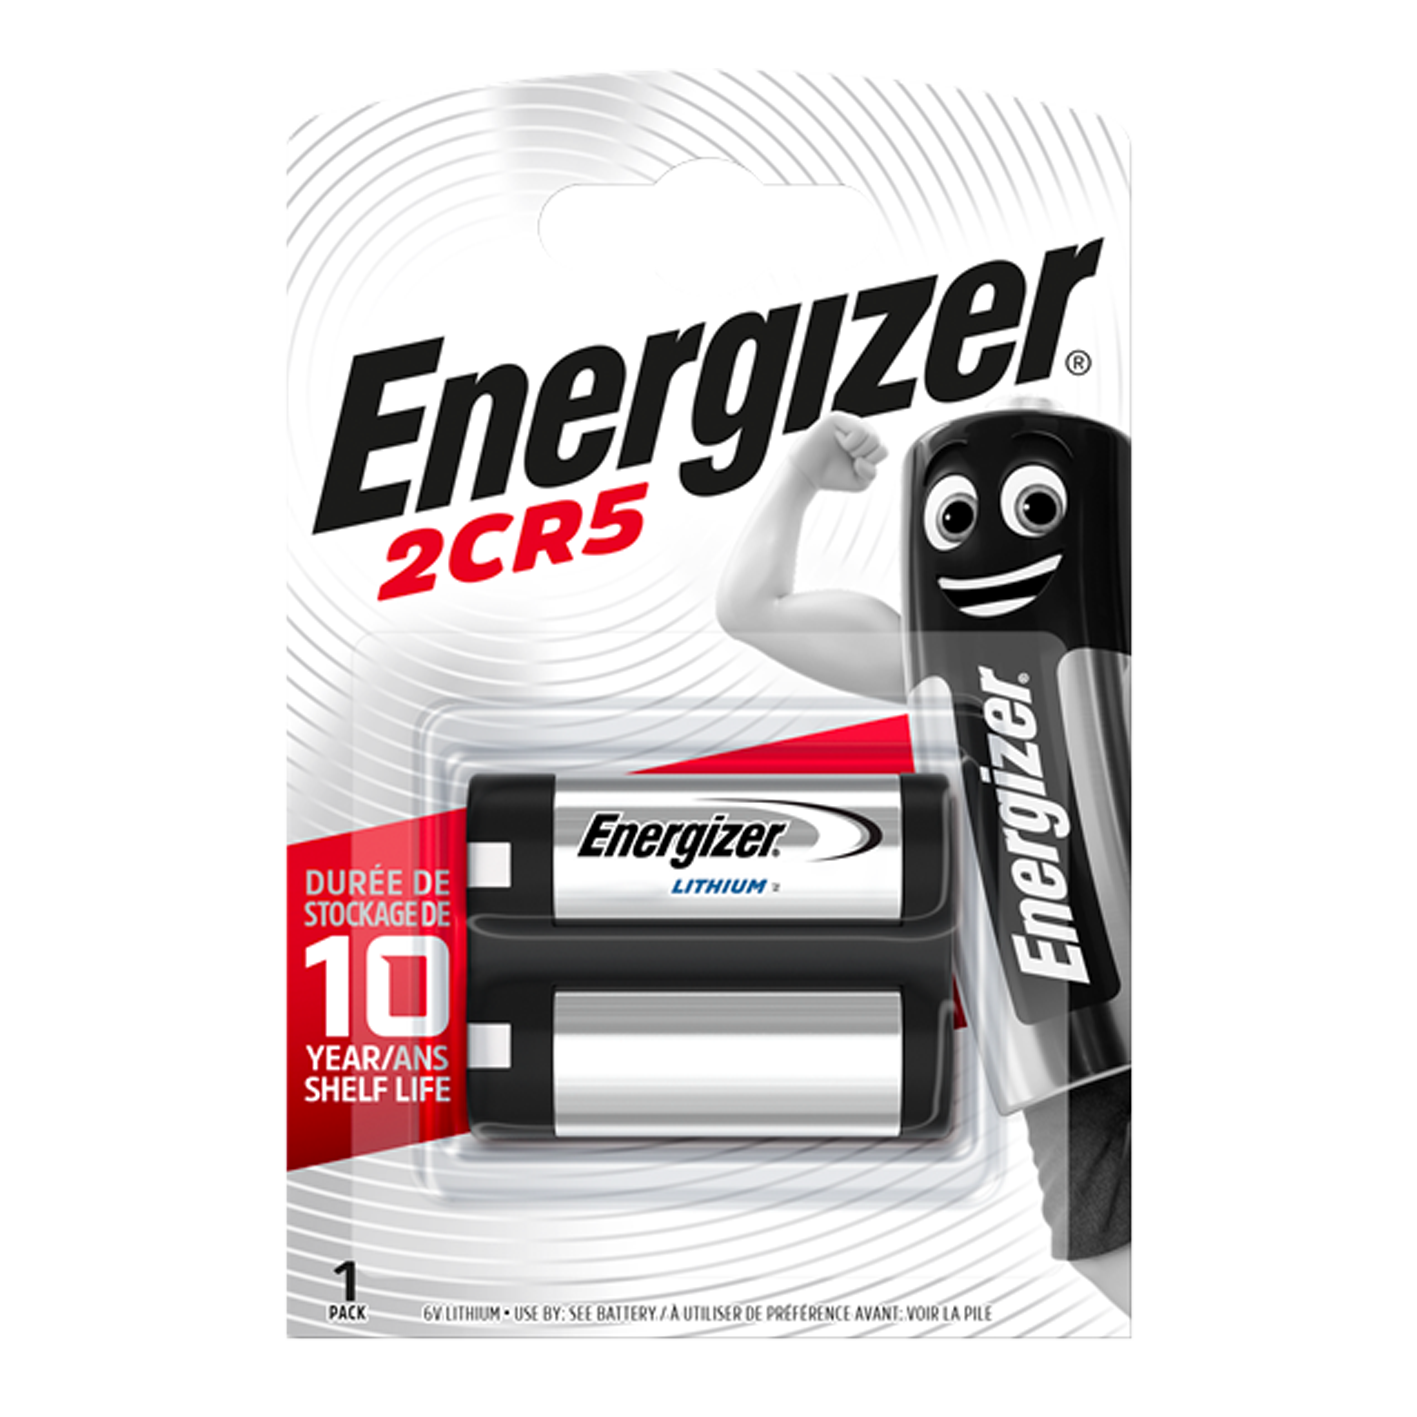 Energizer 2CR5M Lithium, Pack of 1